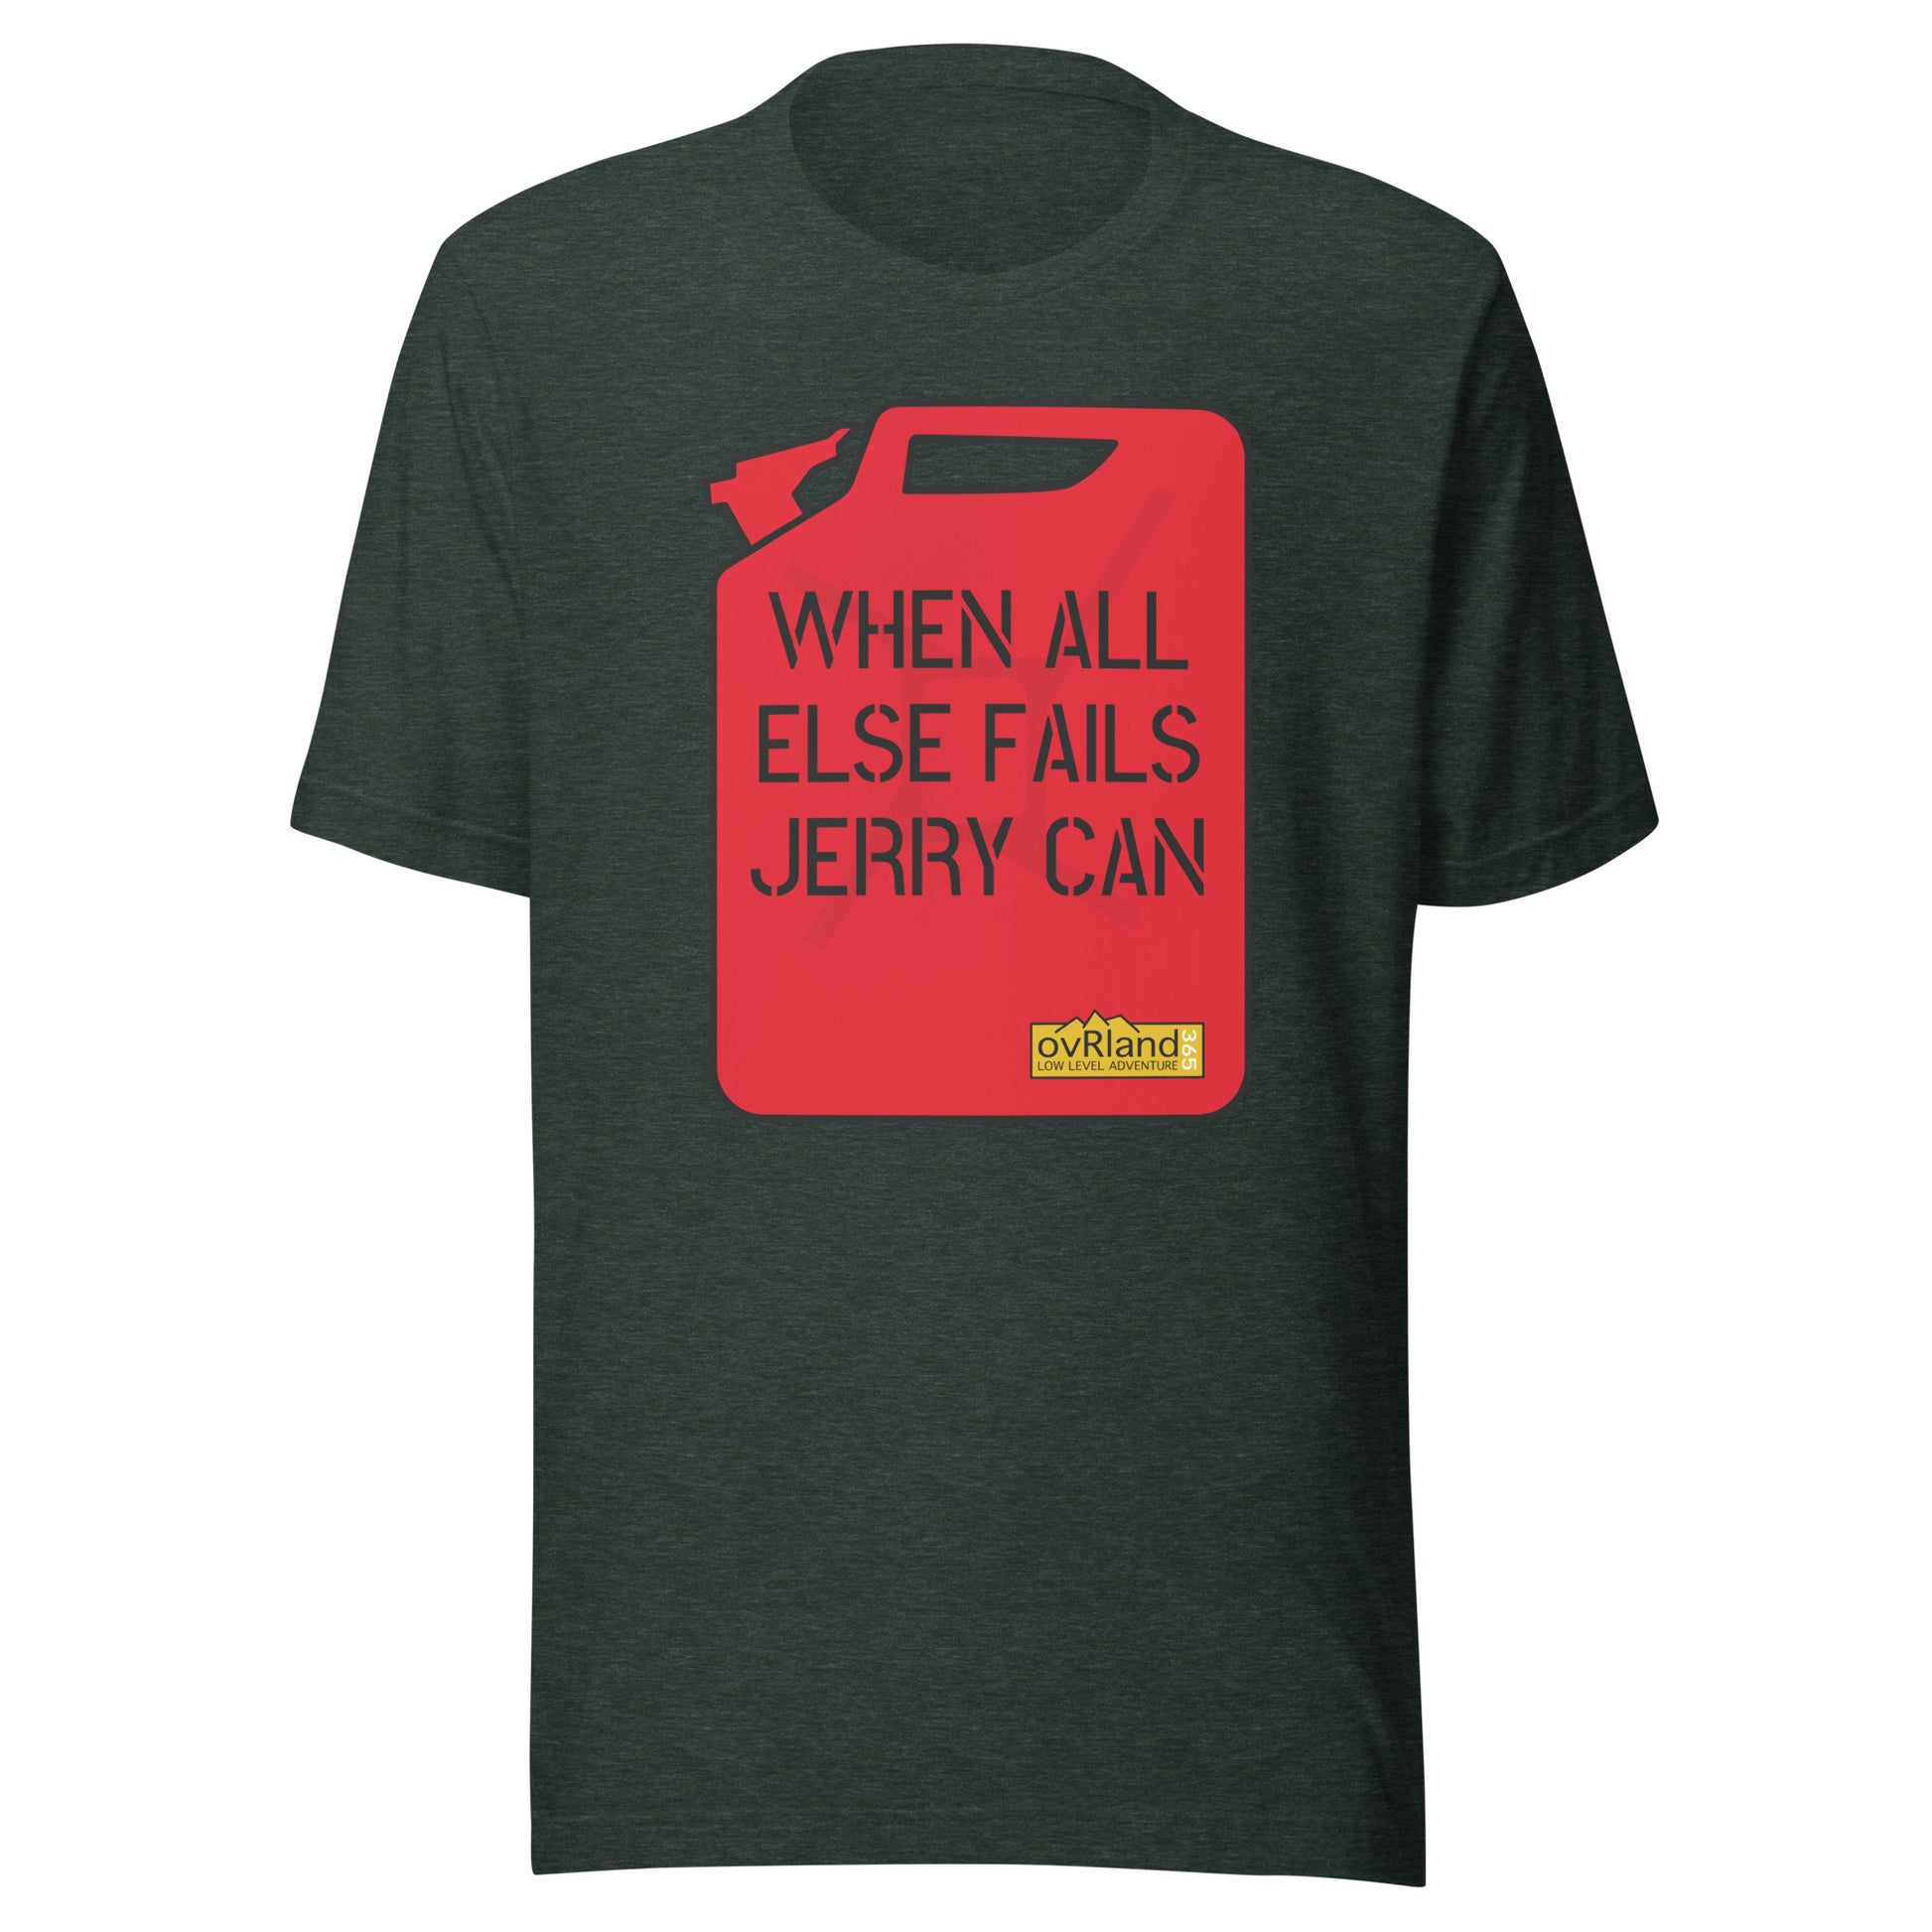 "WHEN ALL ELSE FAILS, JERRY CAN" - Forest T-shirt. overland365.com